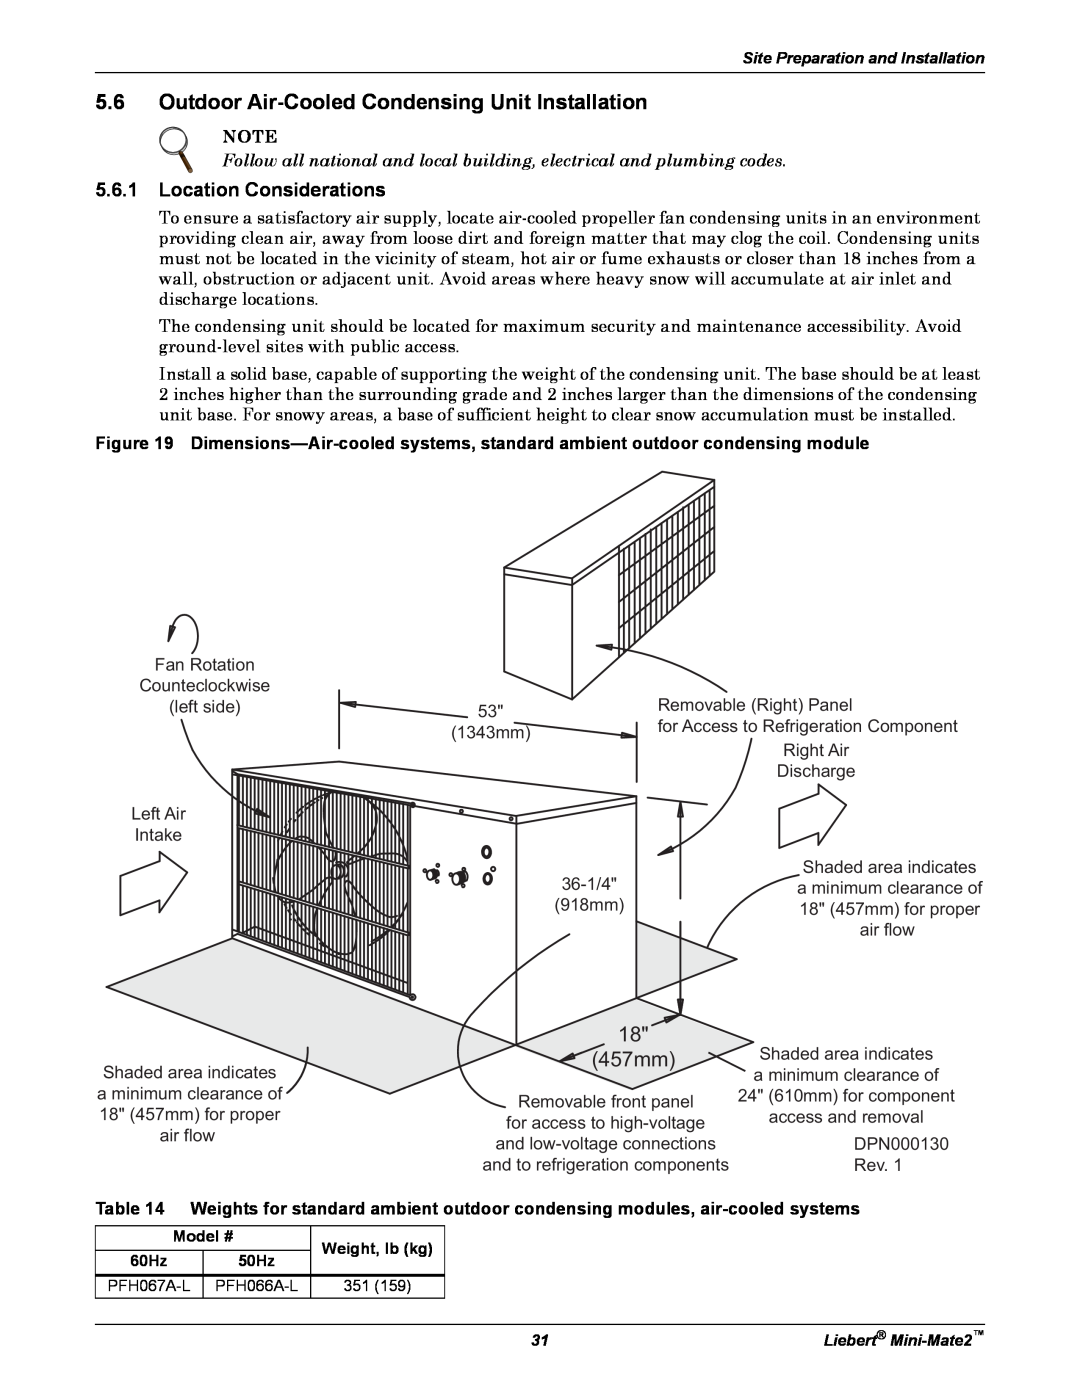 Emerson MINI-MATE2 user manual 457mm, 5.6Outdoor Air-CooledCondensing Unit Installation, 5.6.1Location Considerations 